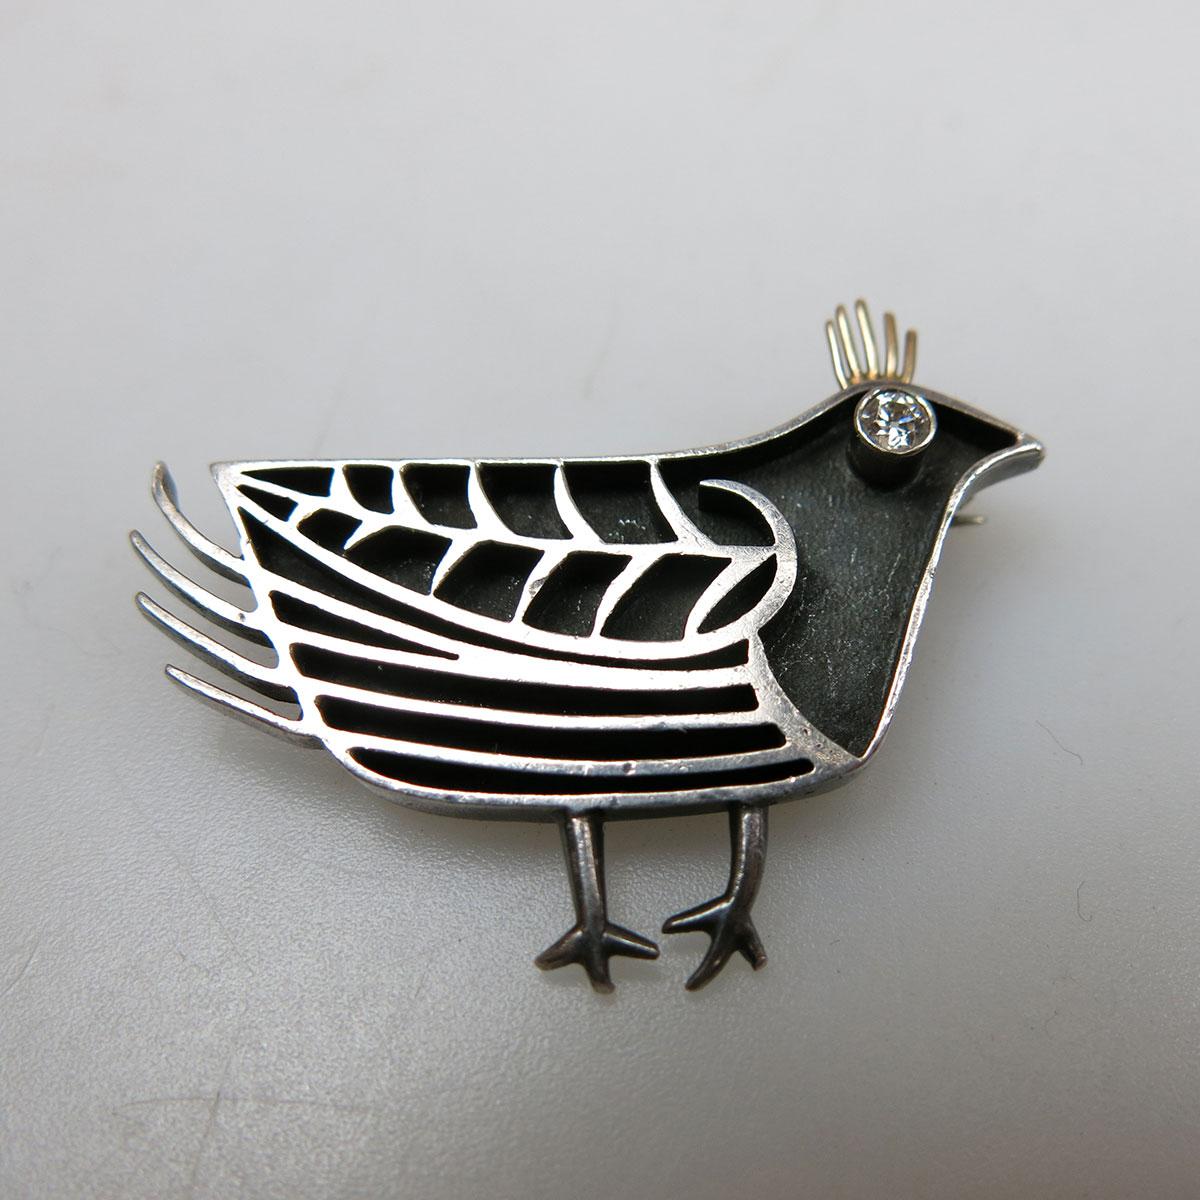 Walter Schluep Sterling Silver And Gold Bird Pin